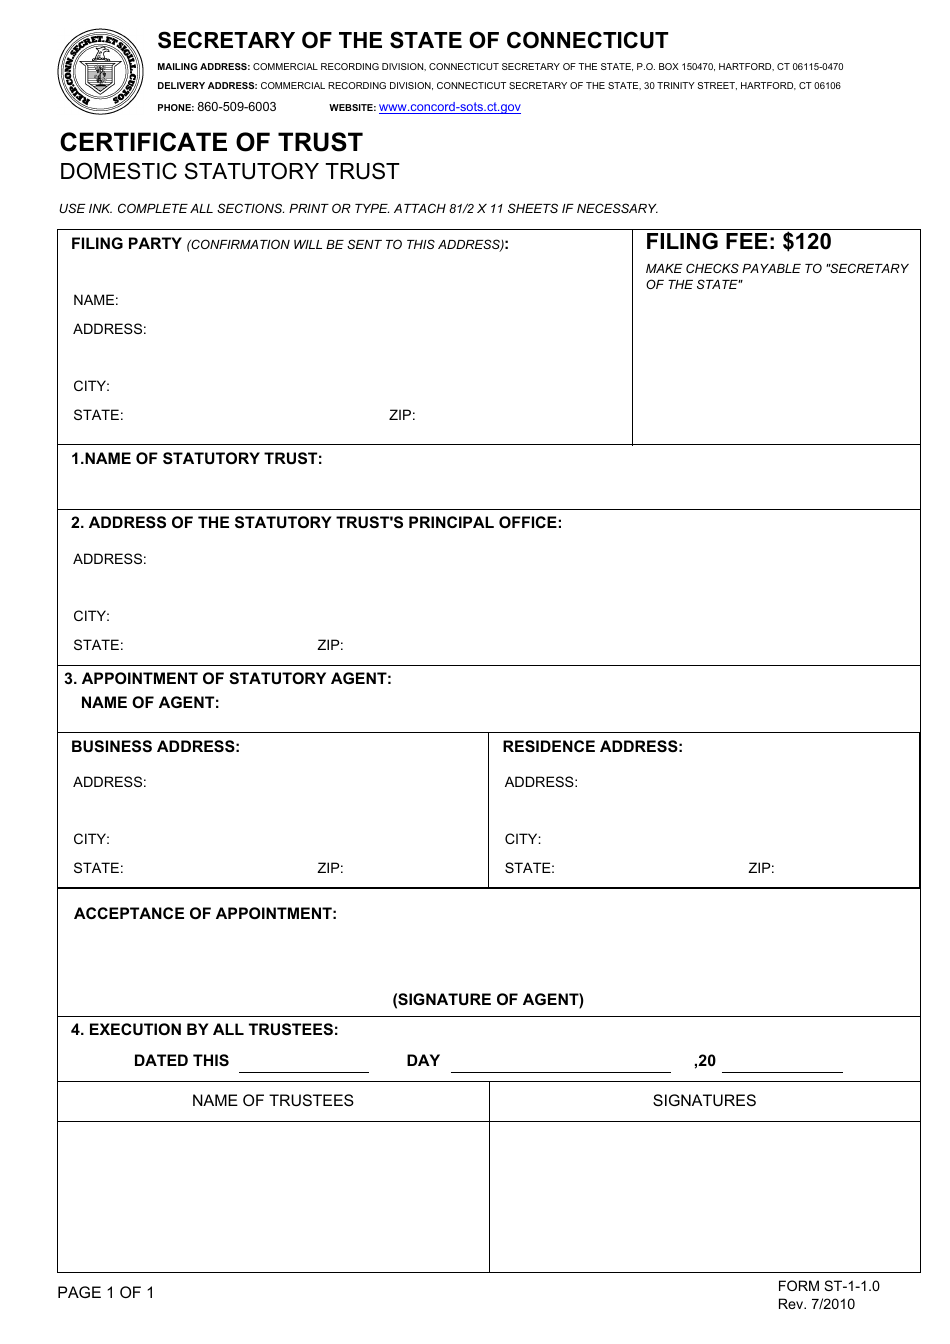 Form ST-1-1.0 Certificate of Trust - Domestic Statutory Trust - Connecticut, Page 1